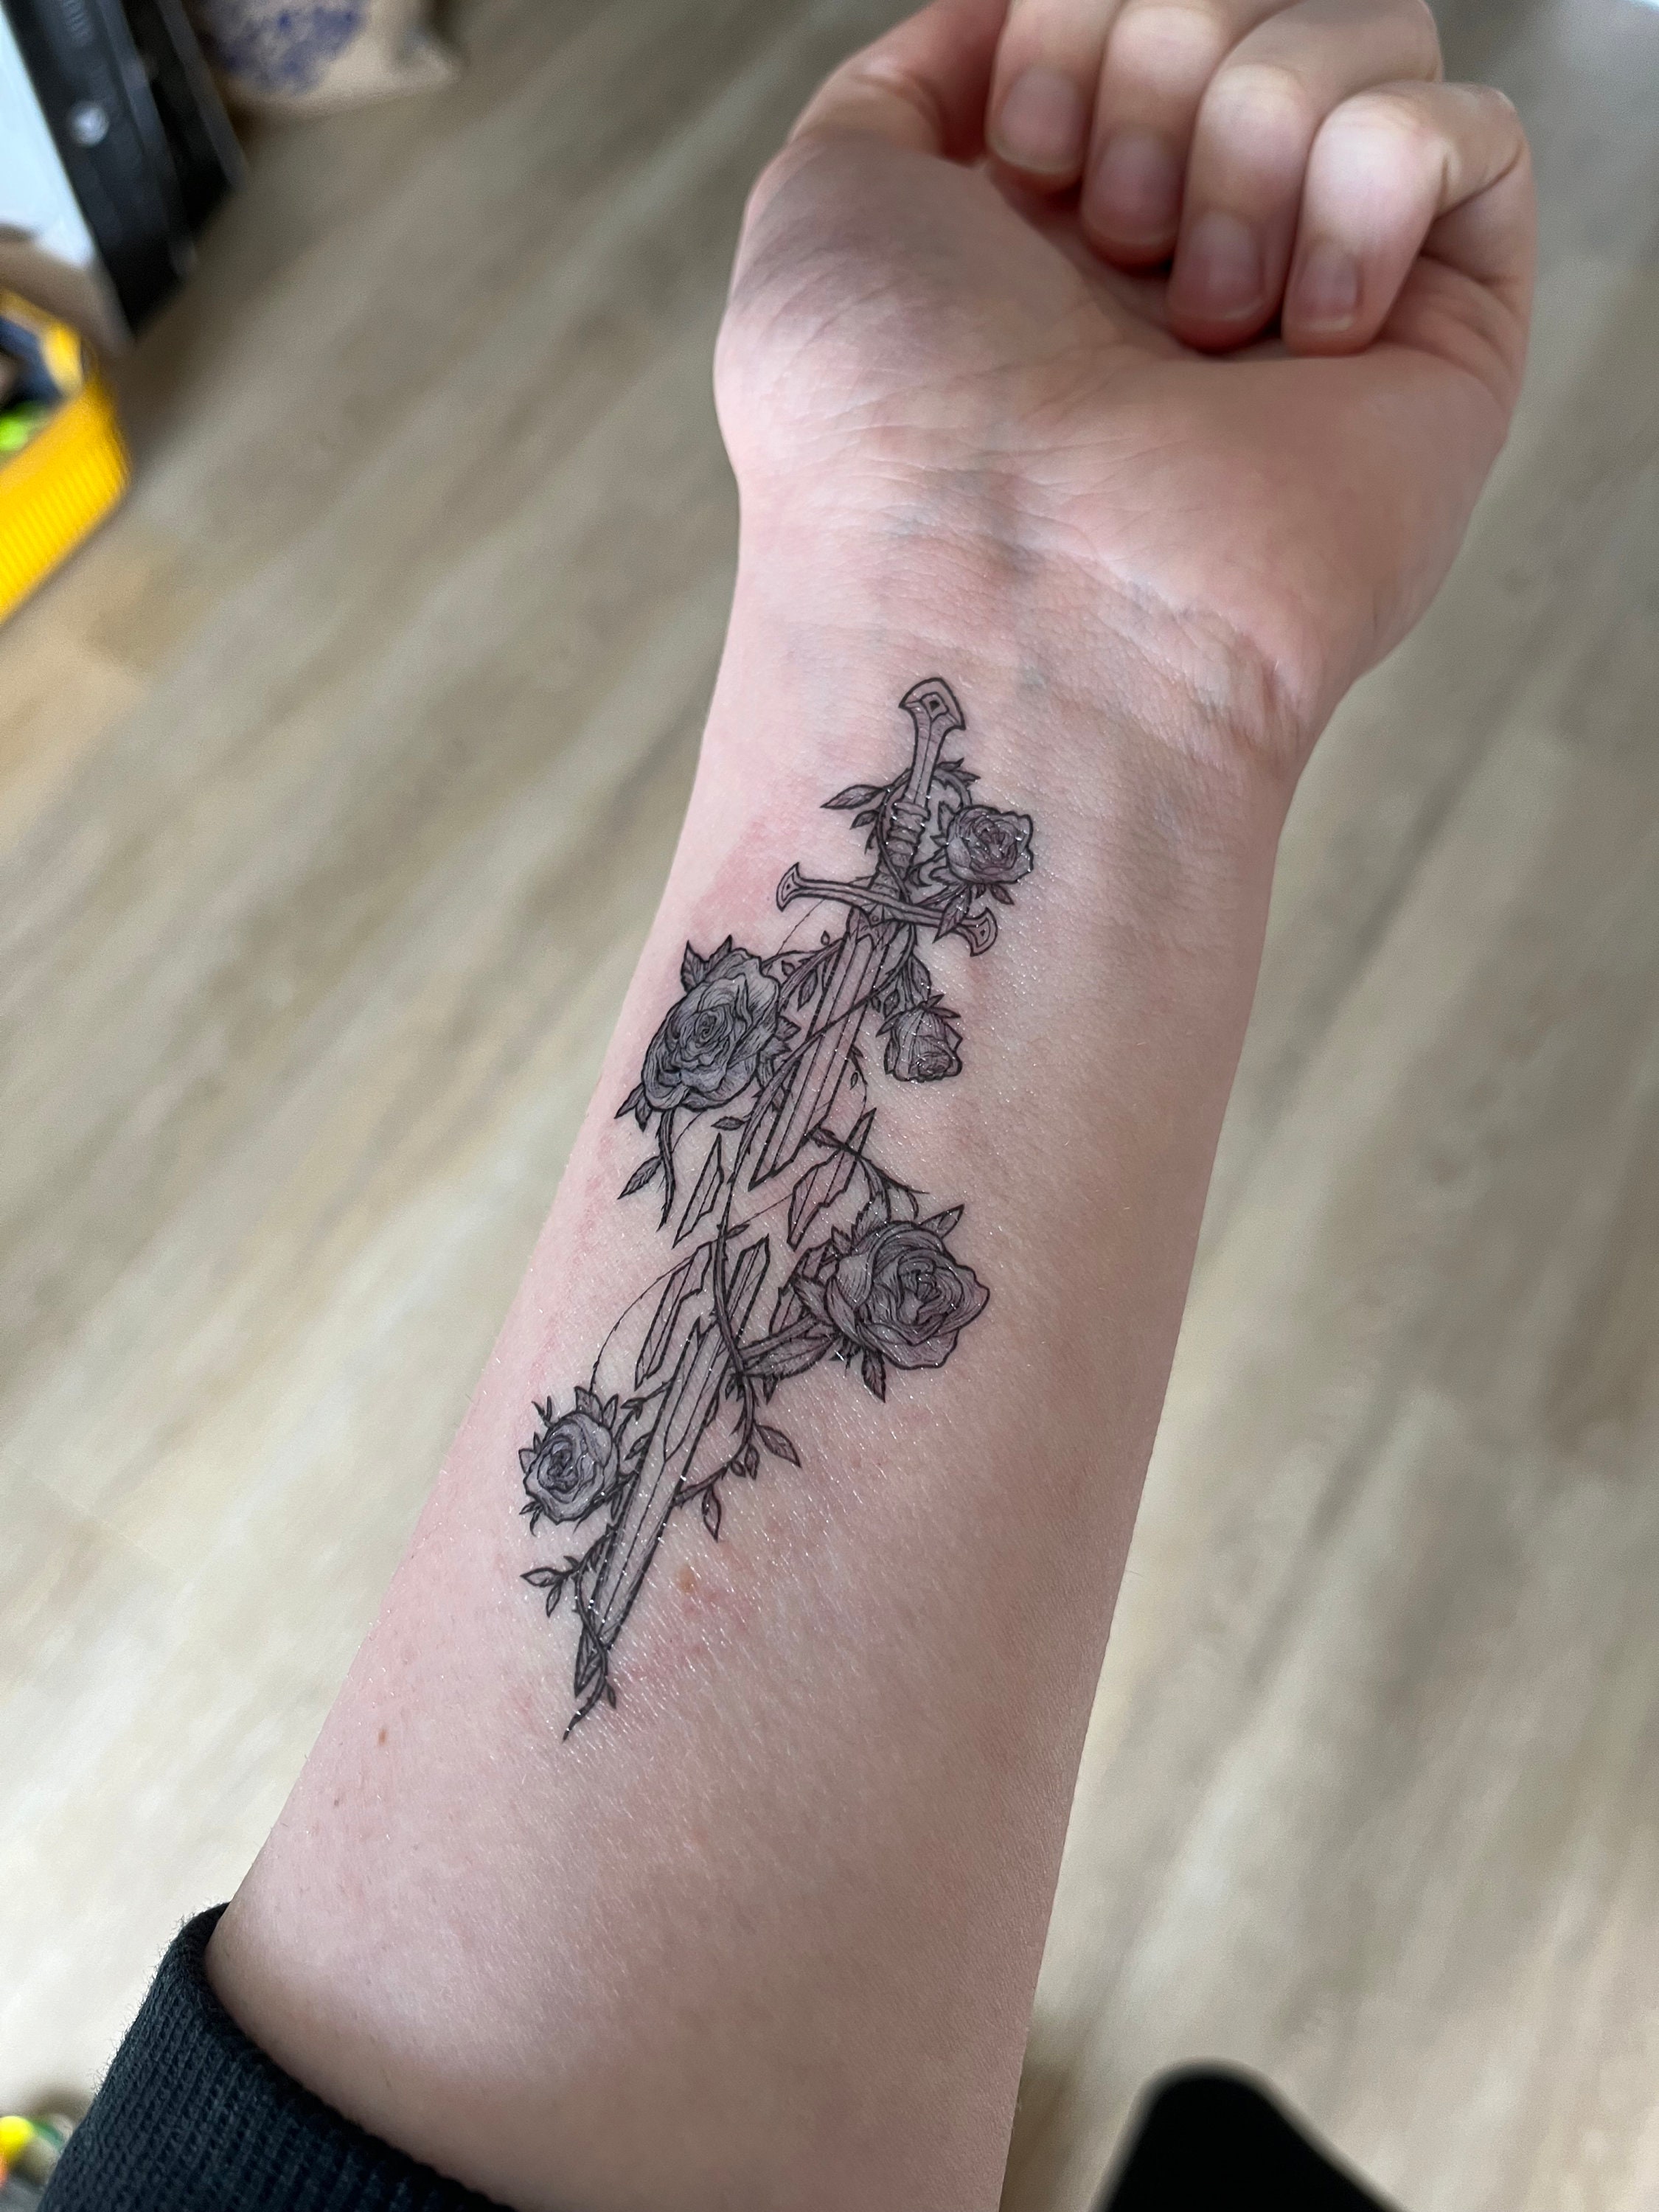 VC INK TATTOO GALLERY on Instagram Zelda breath of the wild sword   Artist  Clara vcinkgallery  Please check out our    httpssmartbiovcinkgallery   for more